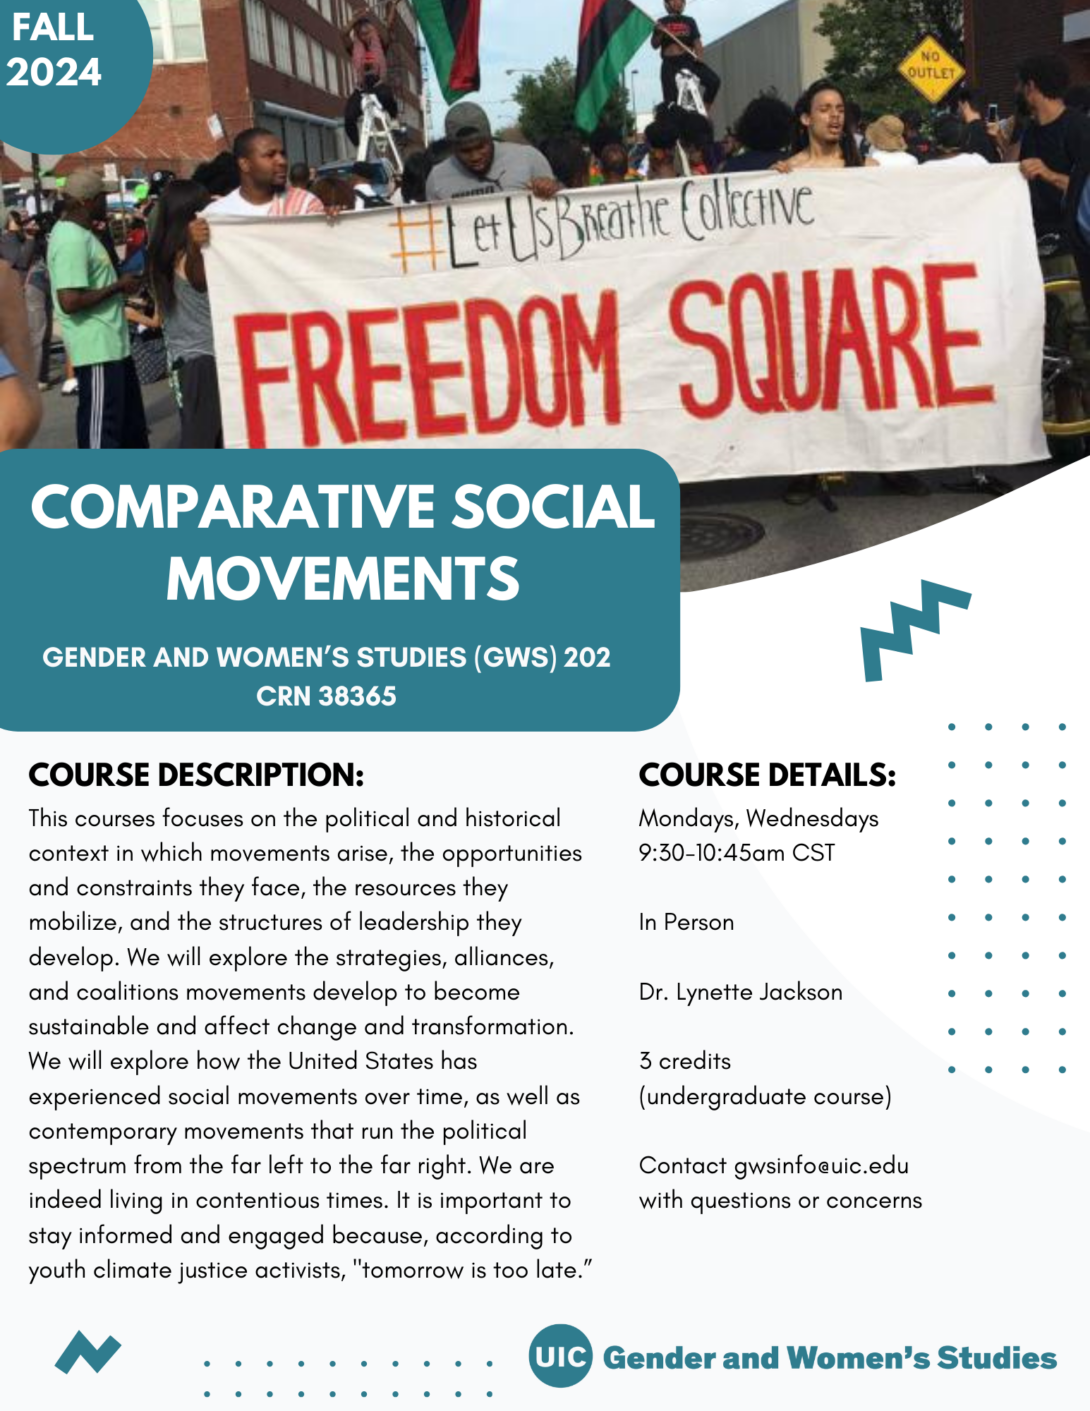 A flyer promoting the fall 2024 Comparative Social Movements course. The top portion of the flyer includes a photo of a protestors at a march holding a banner that reads #LetUsBreatheCollective Freedom Square. In the top left corner is a teal circle with Fall 2024 inside it in white text. The bottom left portion of the photo is covered with a teal block that includes the course title in white text. Below that is the course description and course details in black text on a white background. A teal GWS logo appears in the bottom right of the flyer. Parallel lines of teal dots and teal geometric designs decorate the page.